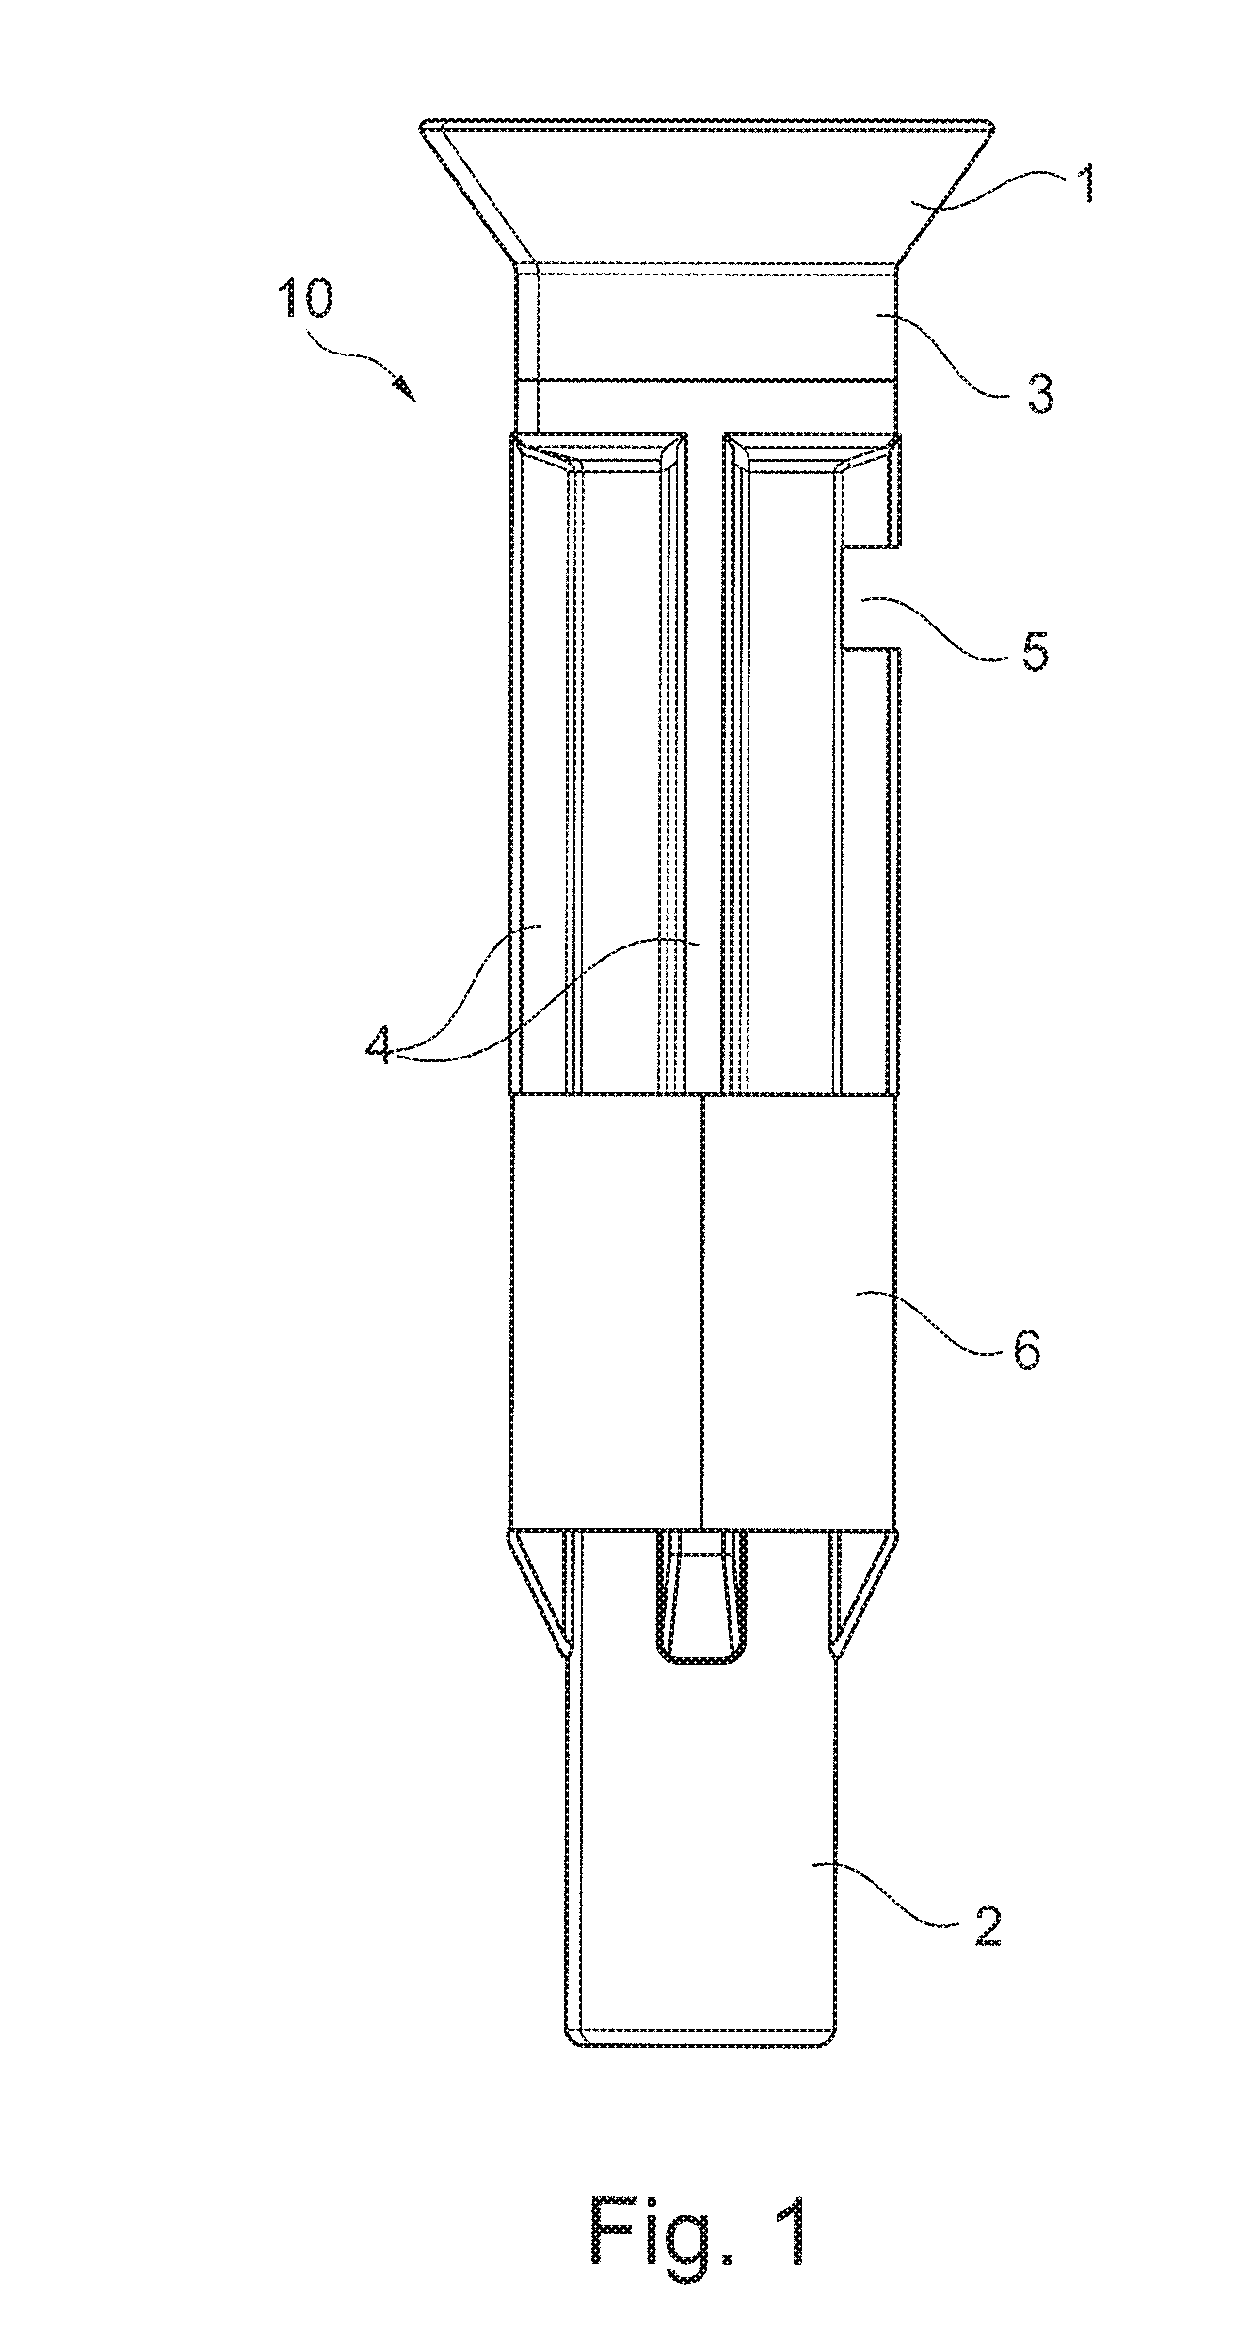 Connector plug for connecting an ignition coil to a spark plug